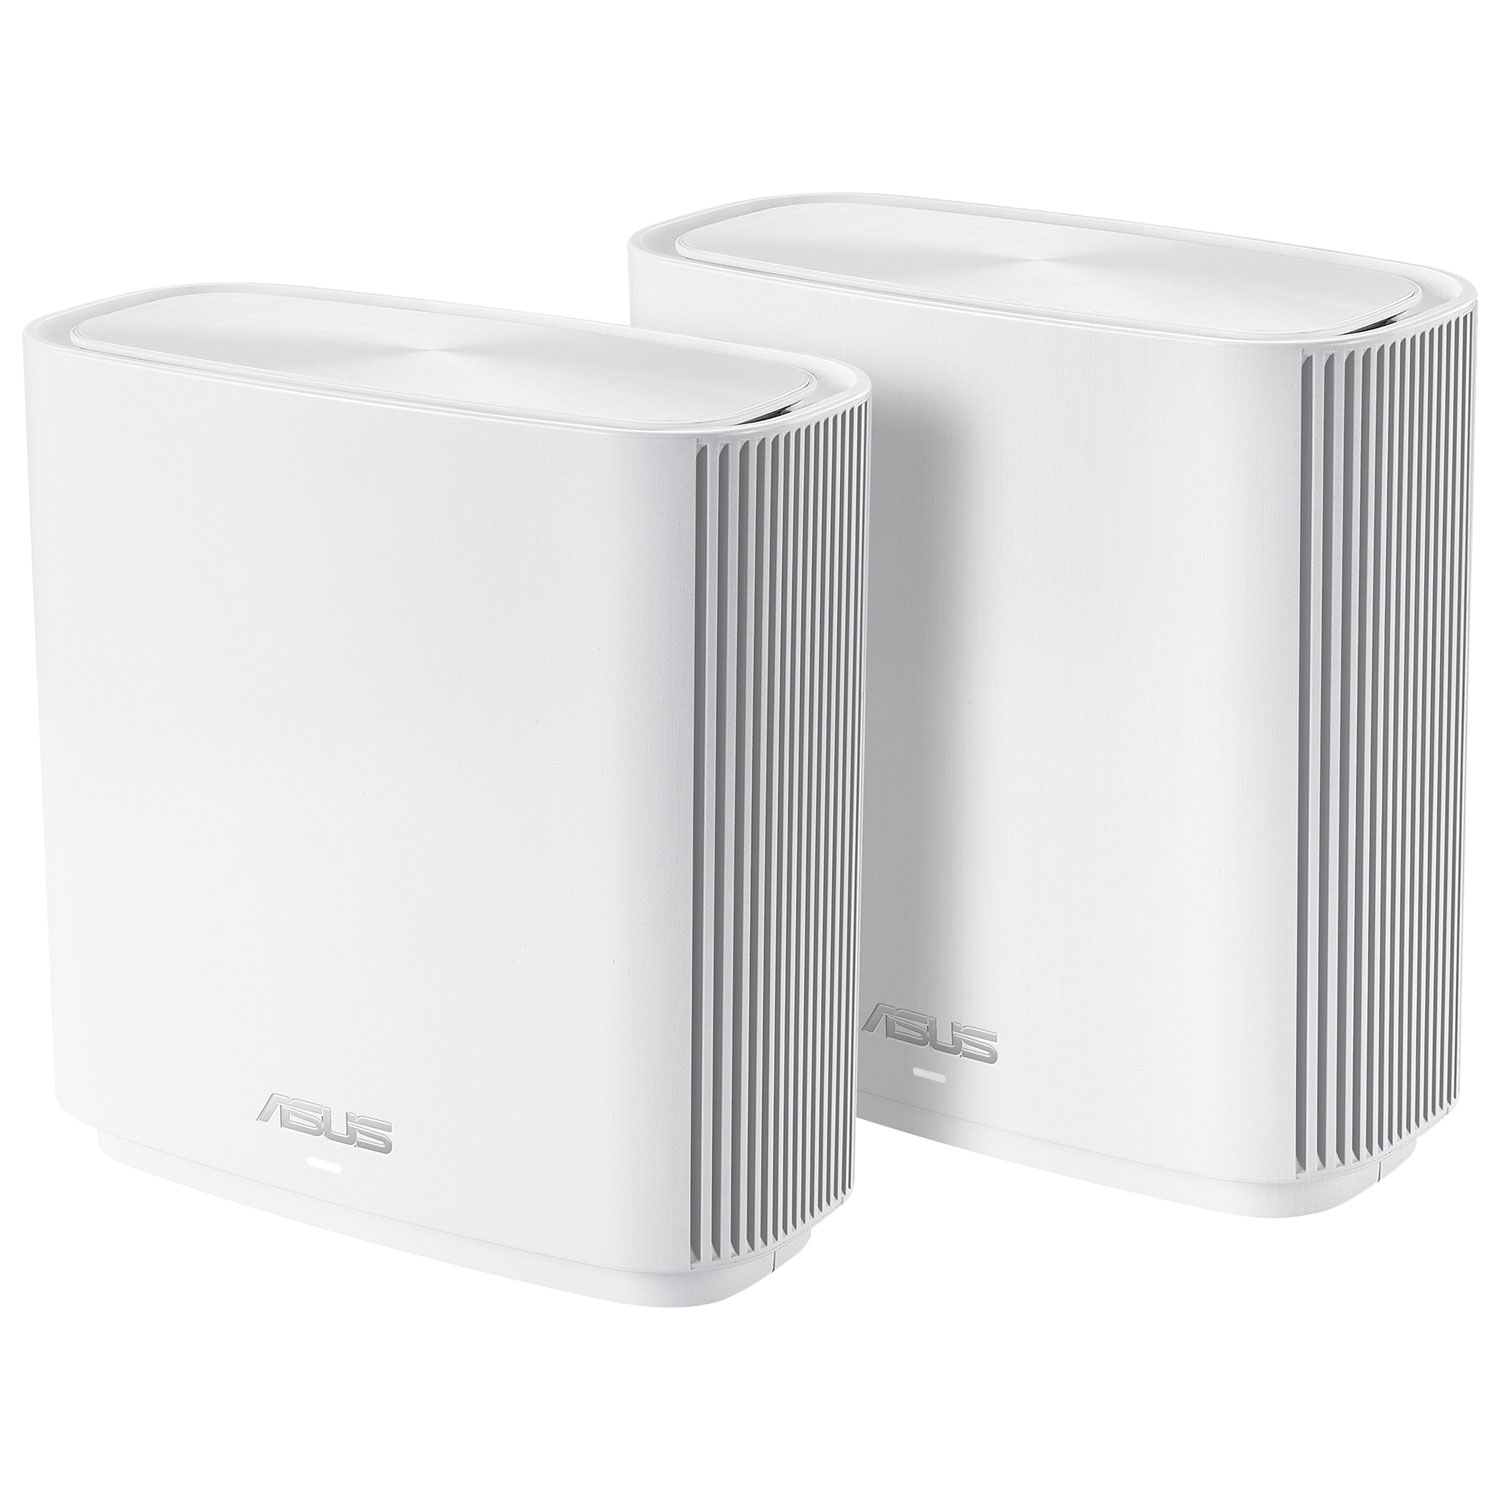 ASUS ZenWifi Wireless AC3000 Tri-Band Router (CT8) - 2 Pack - White